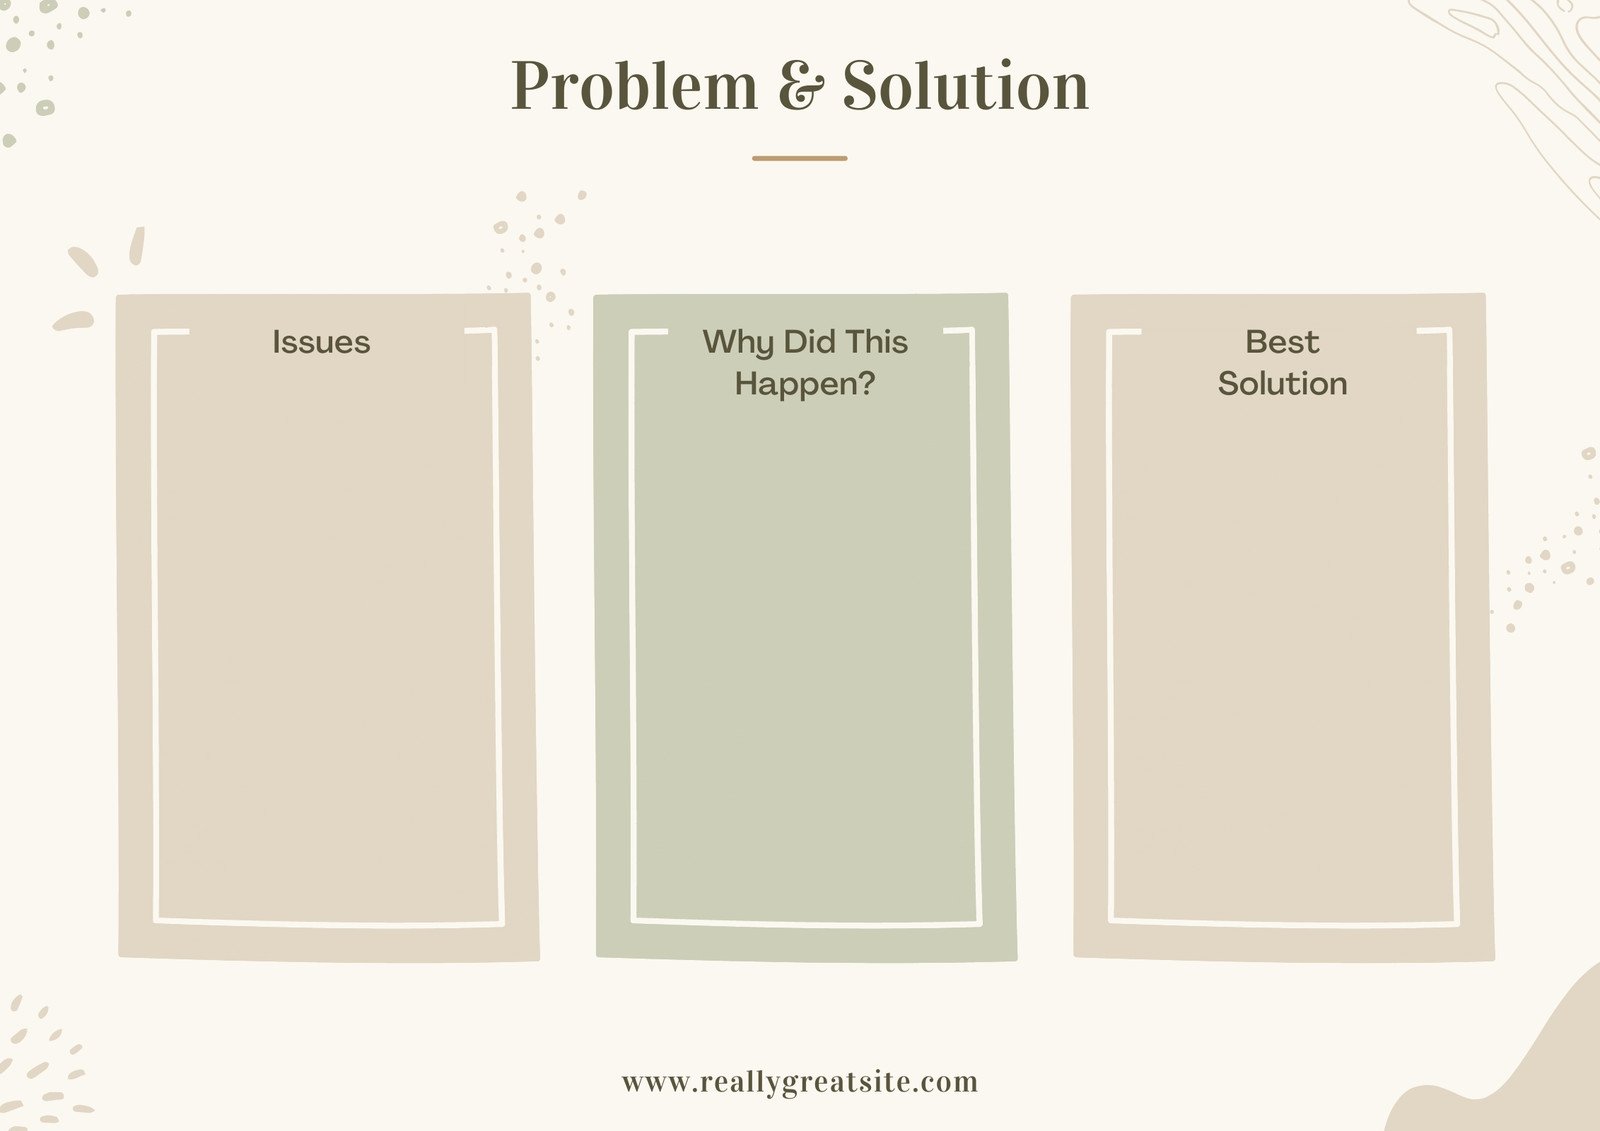 Neutral Business Problem Statement and Solution Template